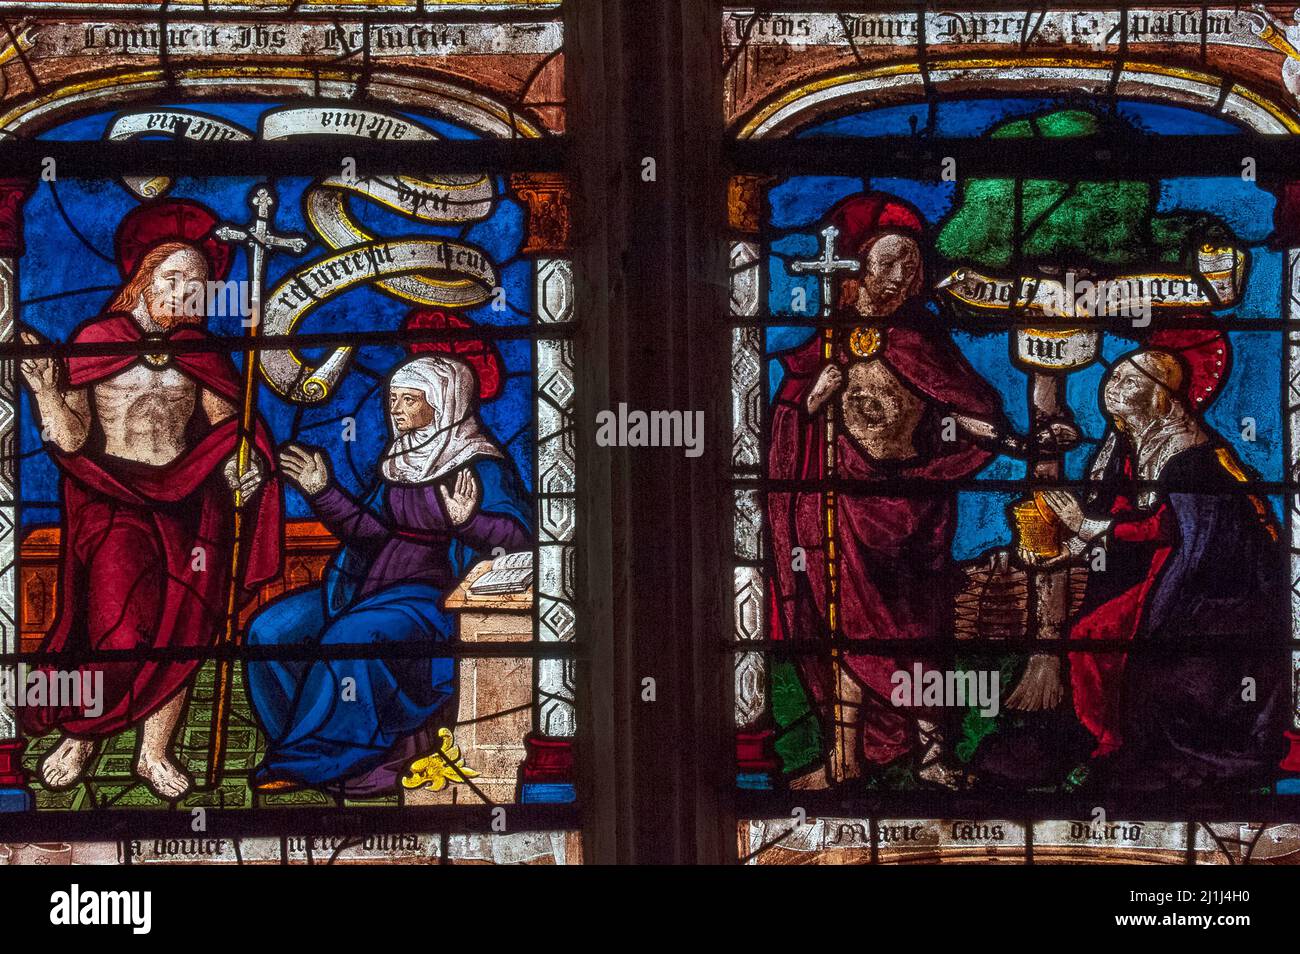 Before his Ascension, Jesus appears to his mother, the Virgin Mary, and to his female disciple, Mary Magdalene: details of a colourful 16th century Renaissance stained glass window in the village church at Ceffonds, in the Champagne region of northeast France, telling the story of the Resurrection. Stock Photo